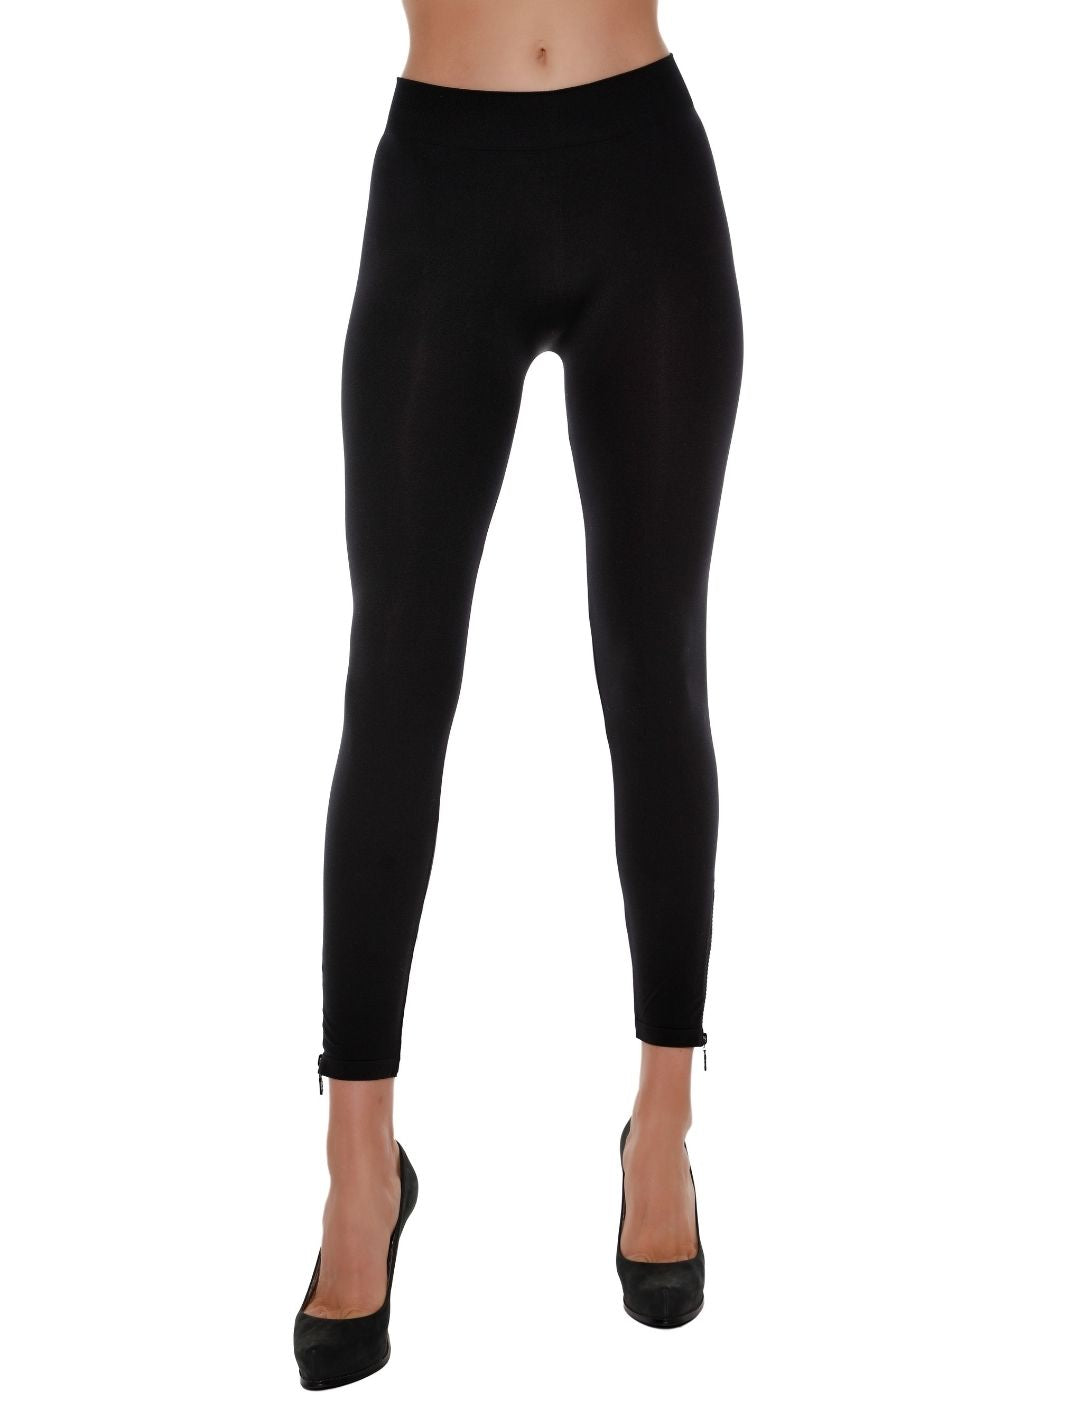 Women's Seamless Fashion Leggings with a Rhinestone Zipper at the Ankle